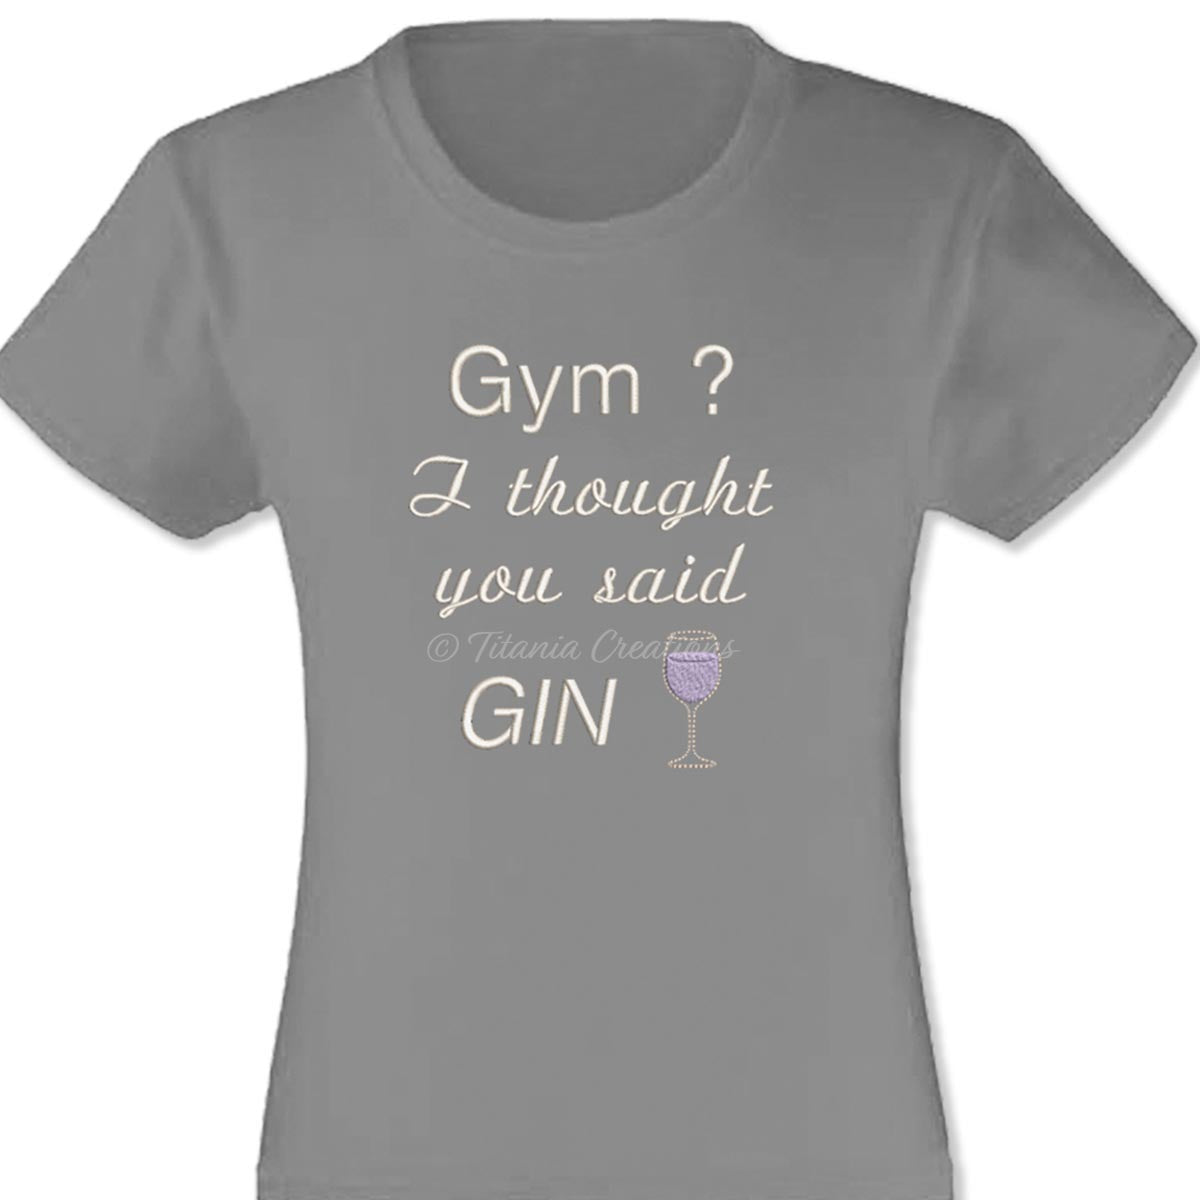 Gym Gin Quote 4x4 5x7 6x10